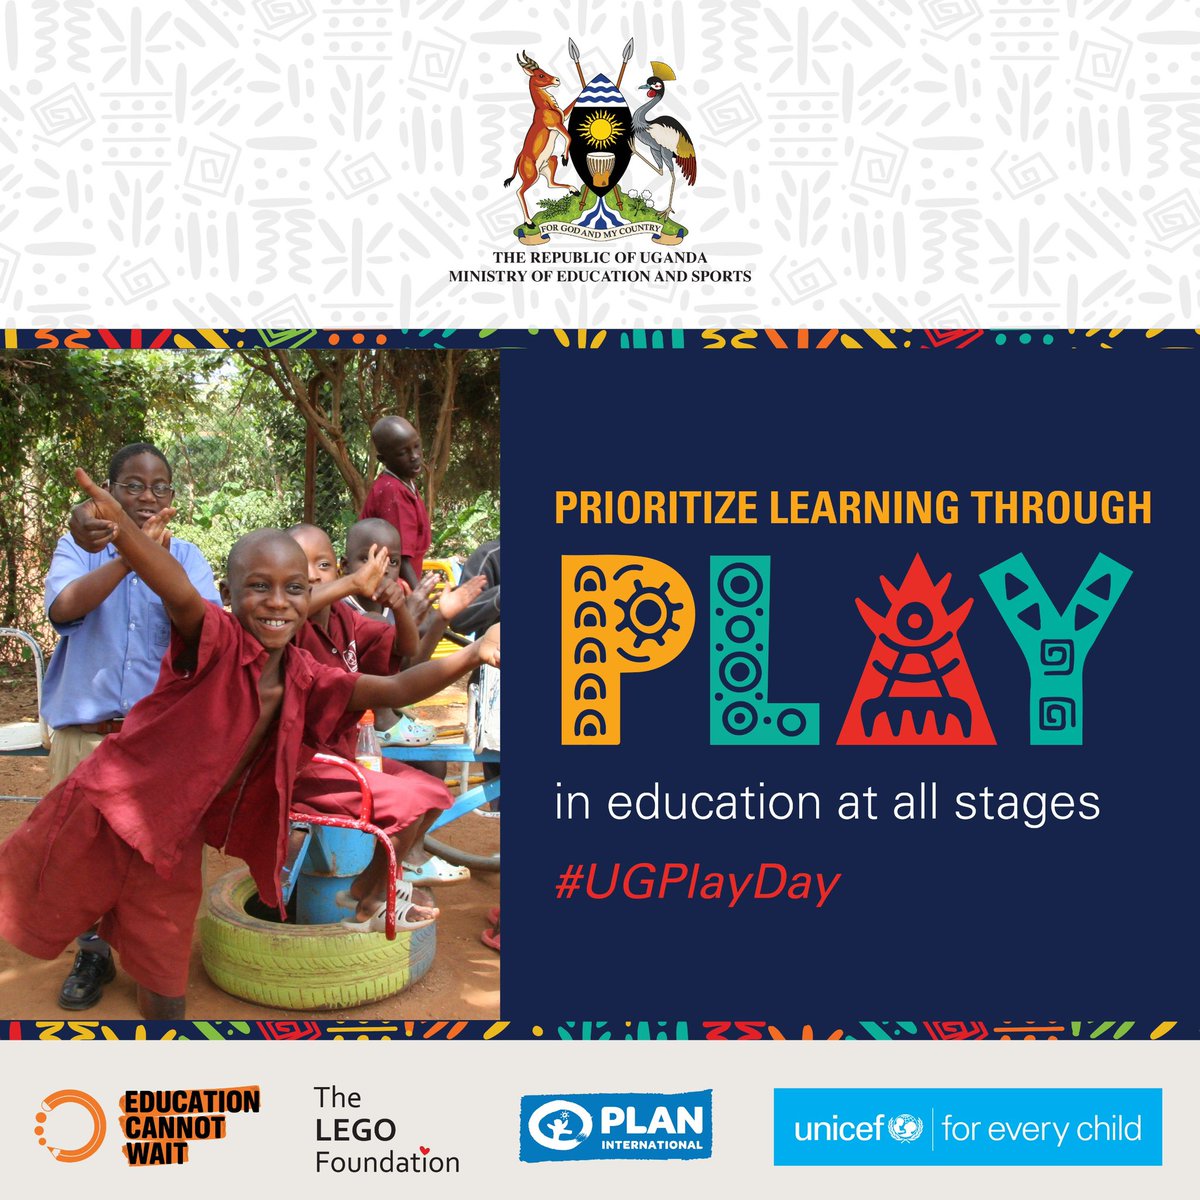 📢Play not only brings joy to children, but also helps them navigate the🌎, build knowledge & learn skills! On April 30, @EduCannotWait will join @GovUganda+strategic partners in the inaugural commemoration of #UgPlayDay – a unique opportunity to showcase best practices of